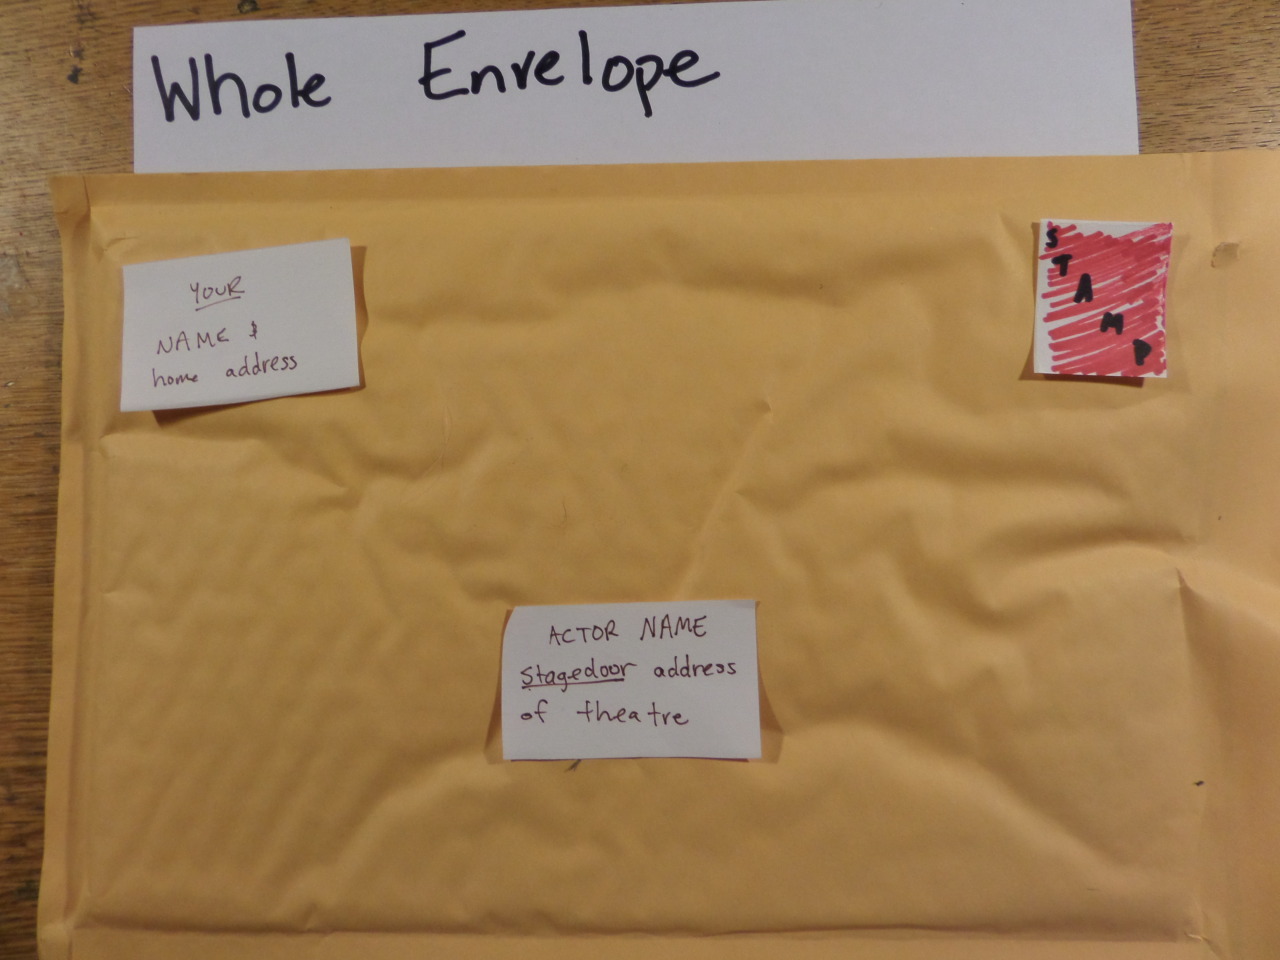 How to Properly Address an Envelope on a Card